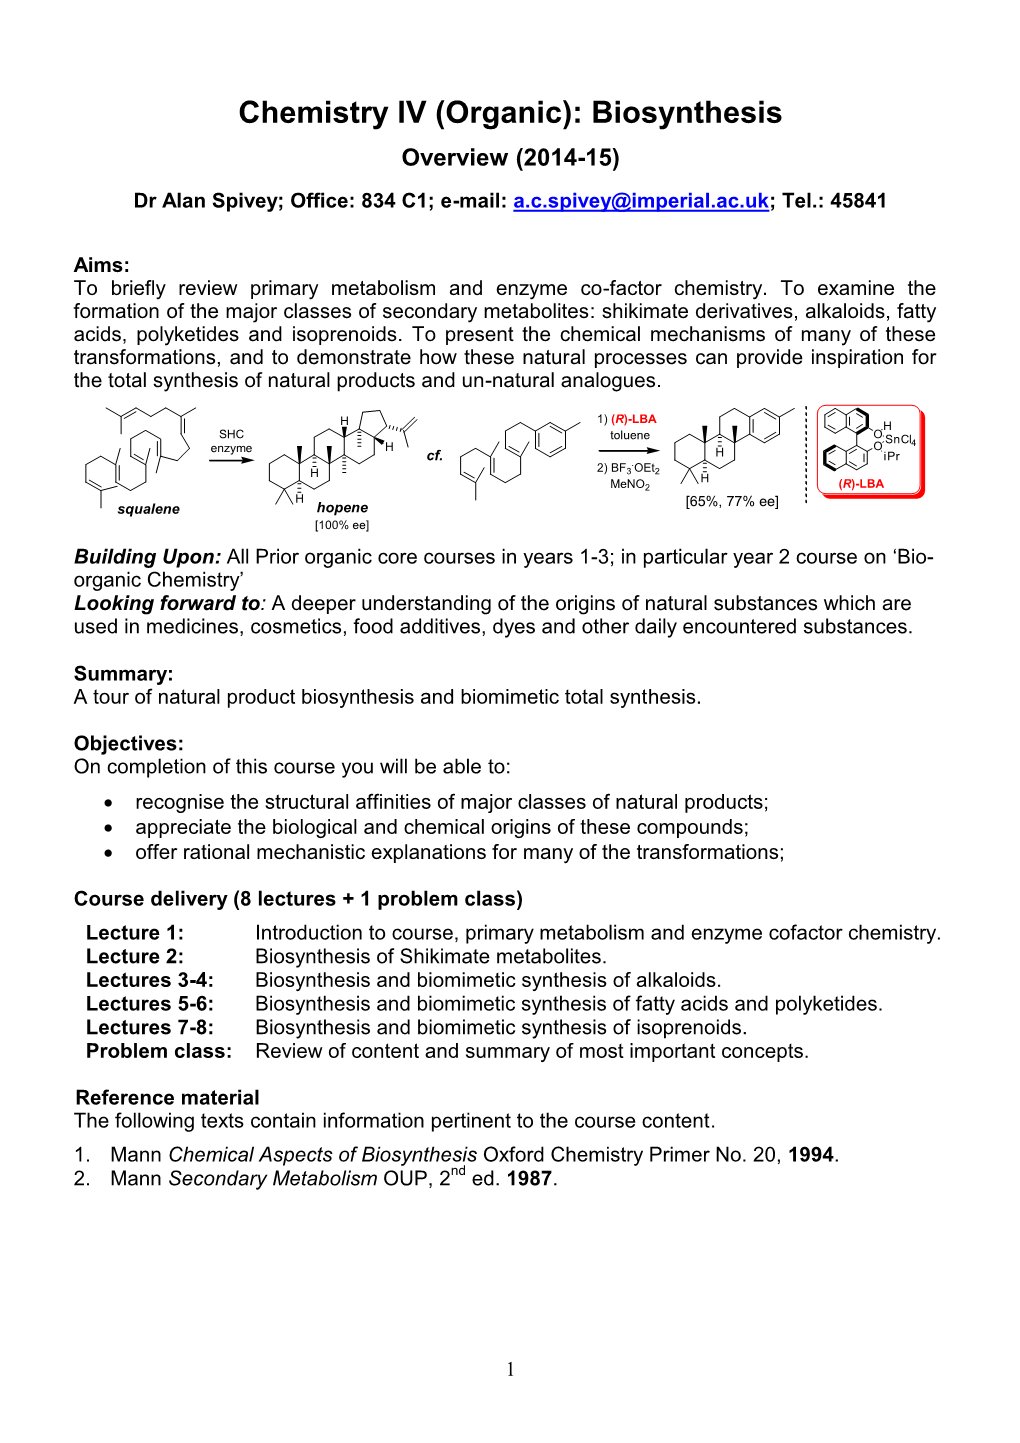 Chemistry IV (Organic): Biosynthesis Overview (2014-15)